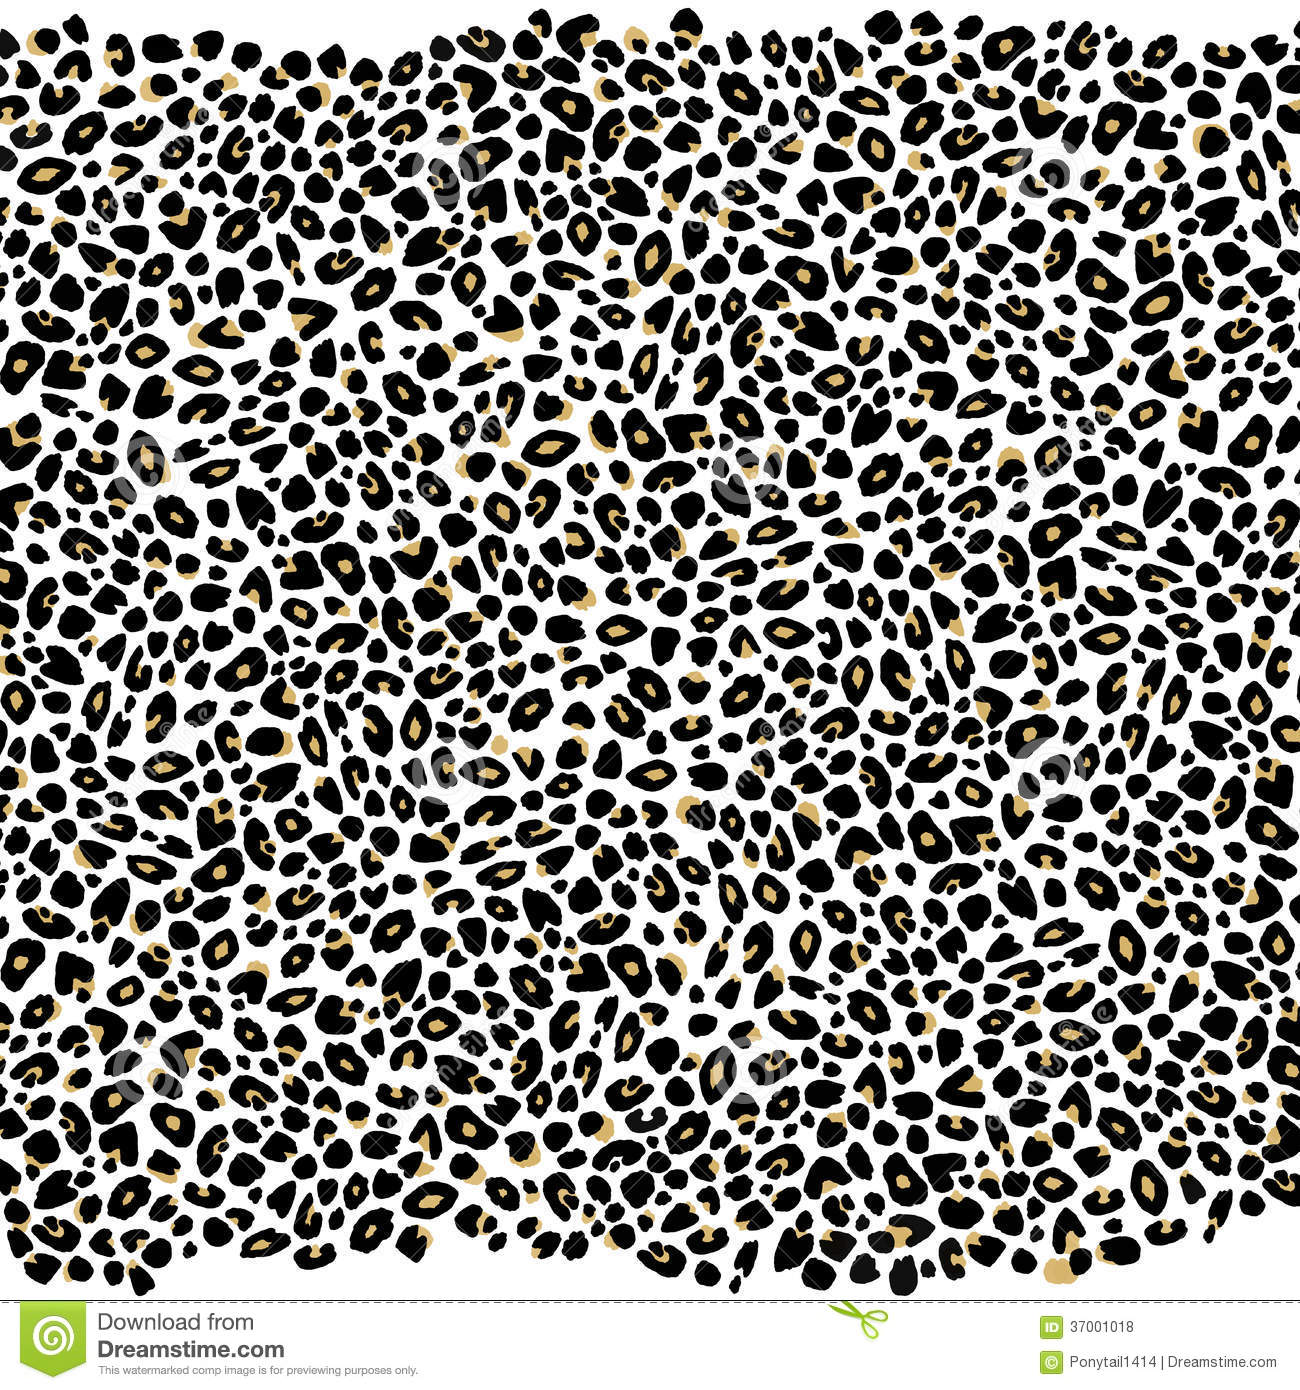 Gallery For gt Cheetah Print Black And White Background